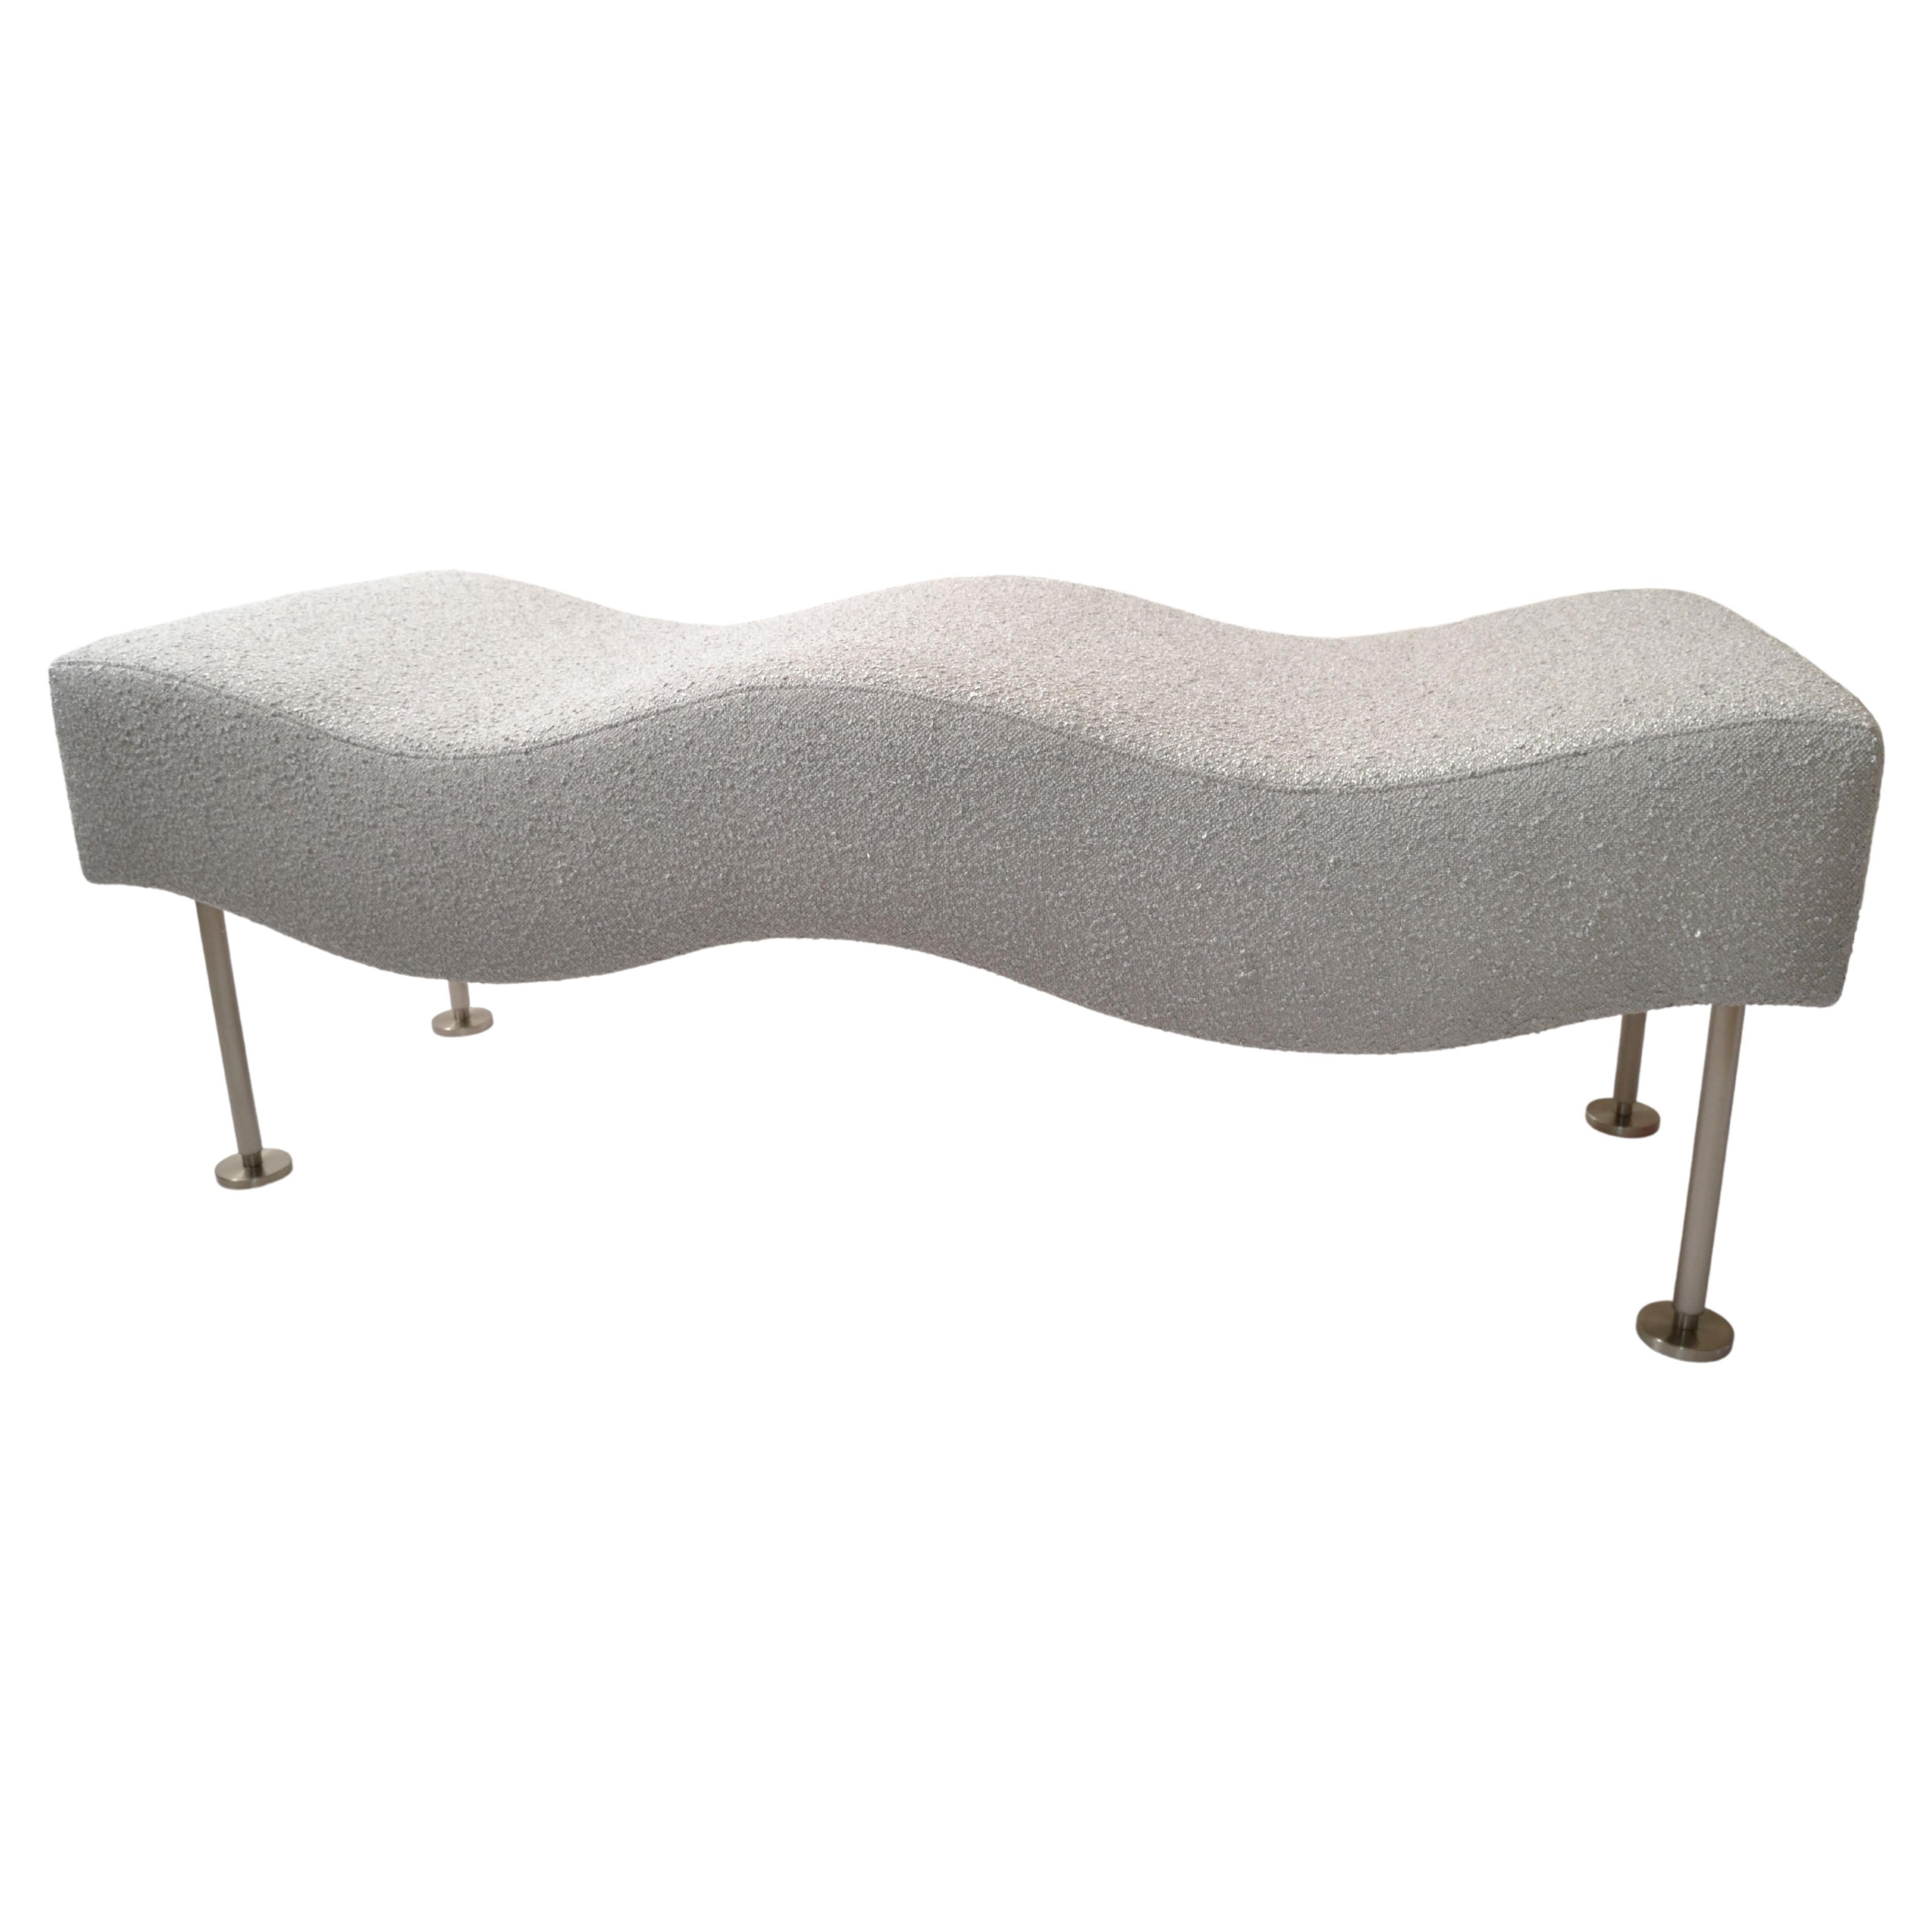 1 of 2 Modern Brueton Industries Silver Gray Bouclé Fabric Wave Daybed Bench 90